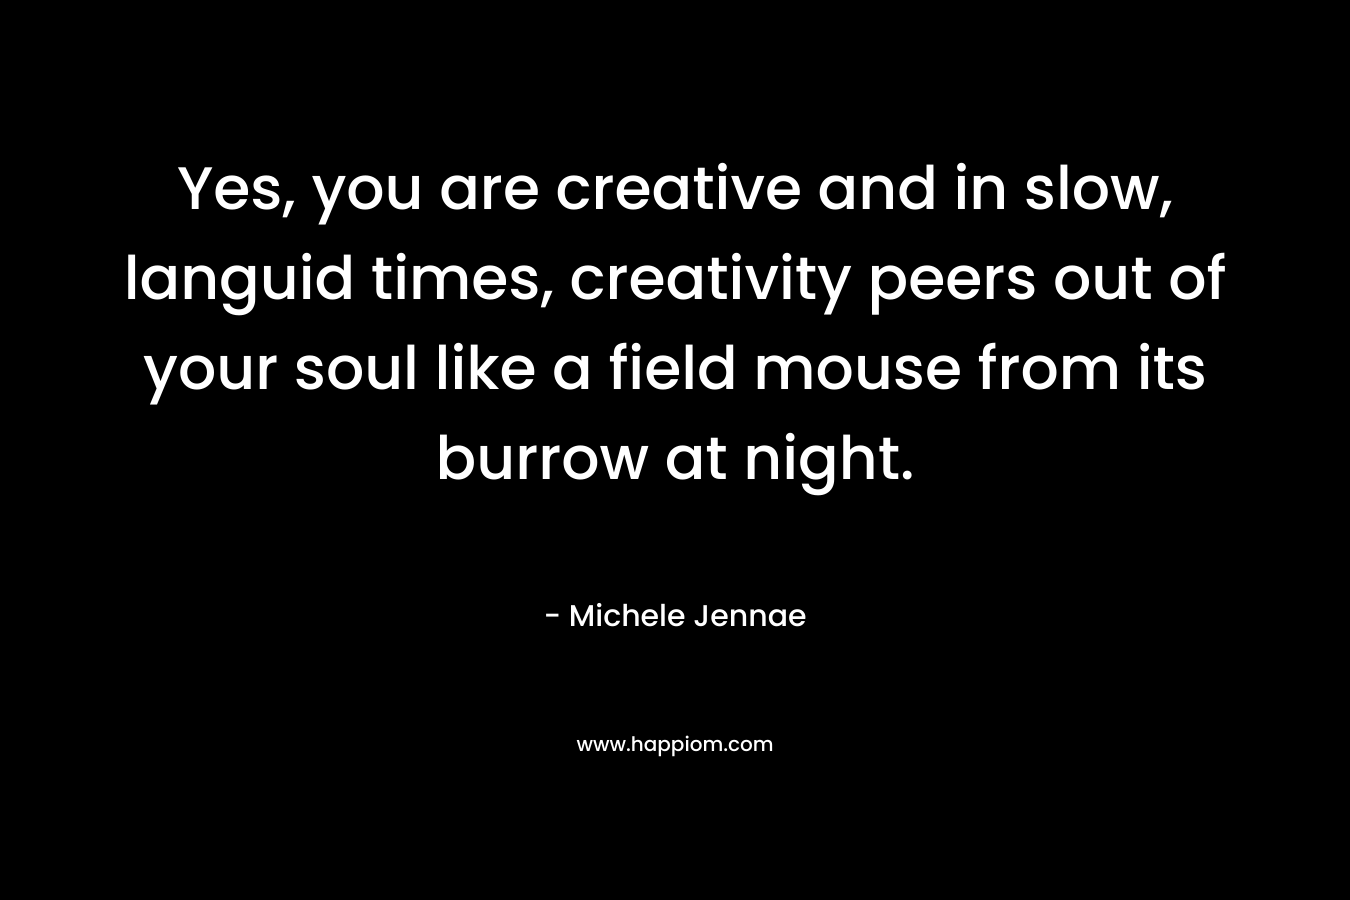 Yes, you are creative and in slow, languid times, creativity peers out of your soul like a field mouse from its burrow at night.